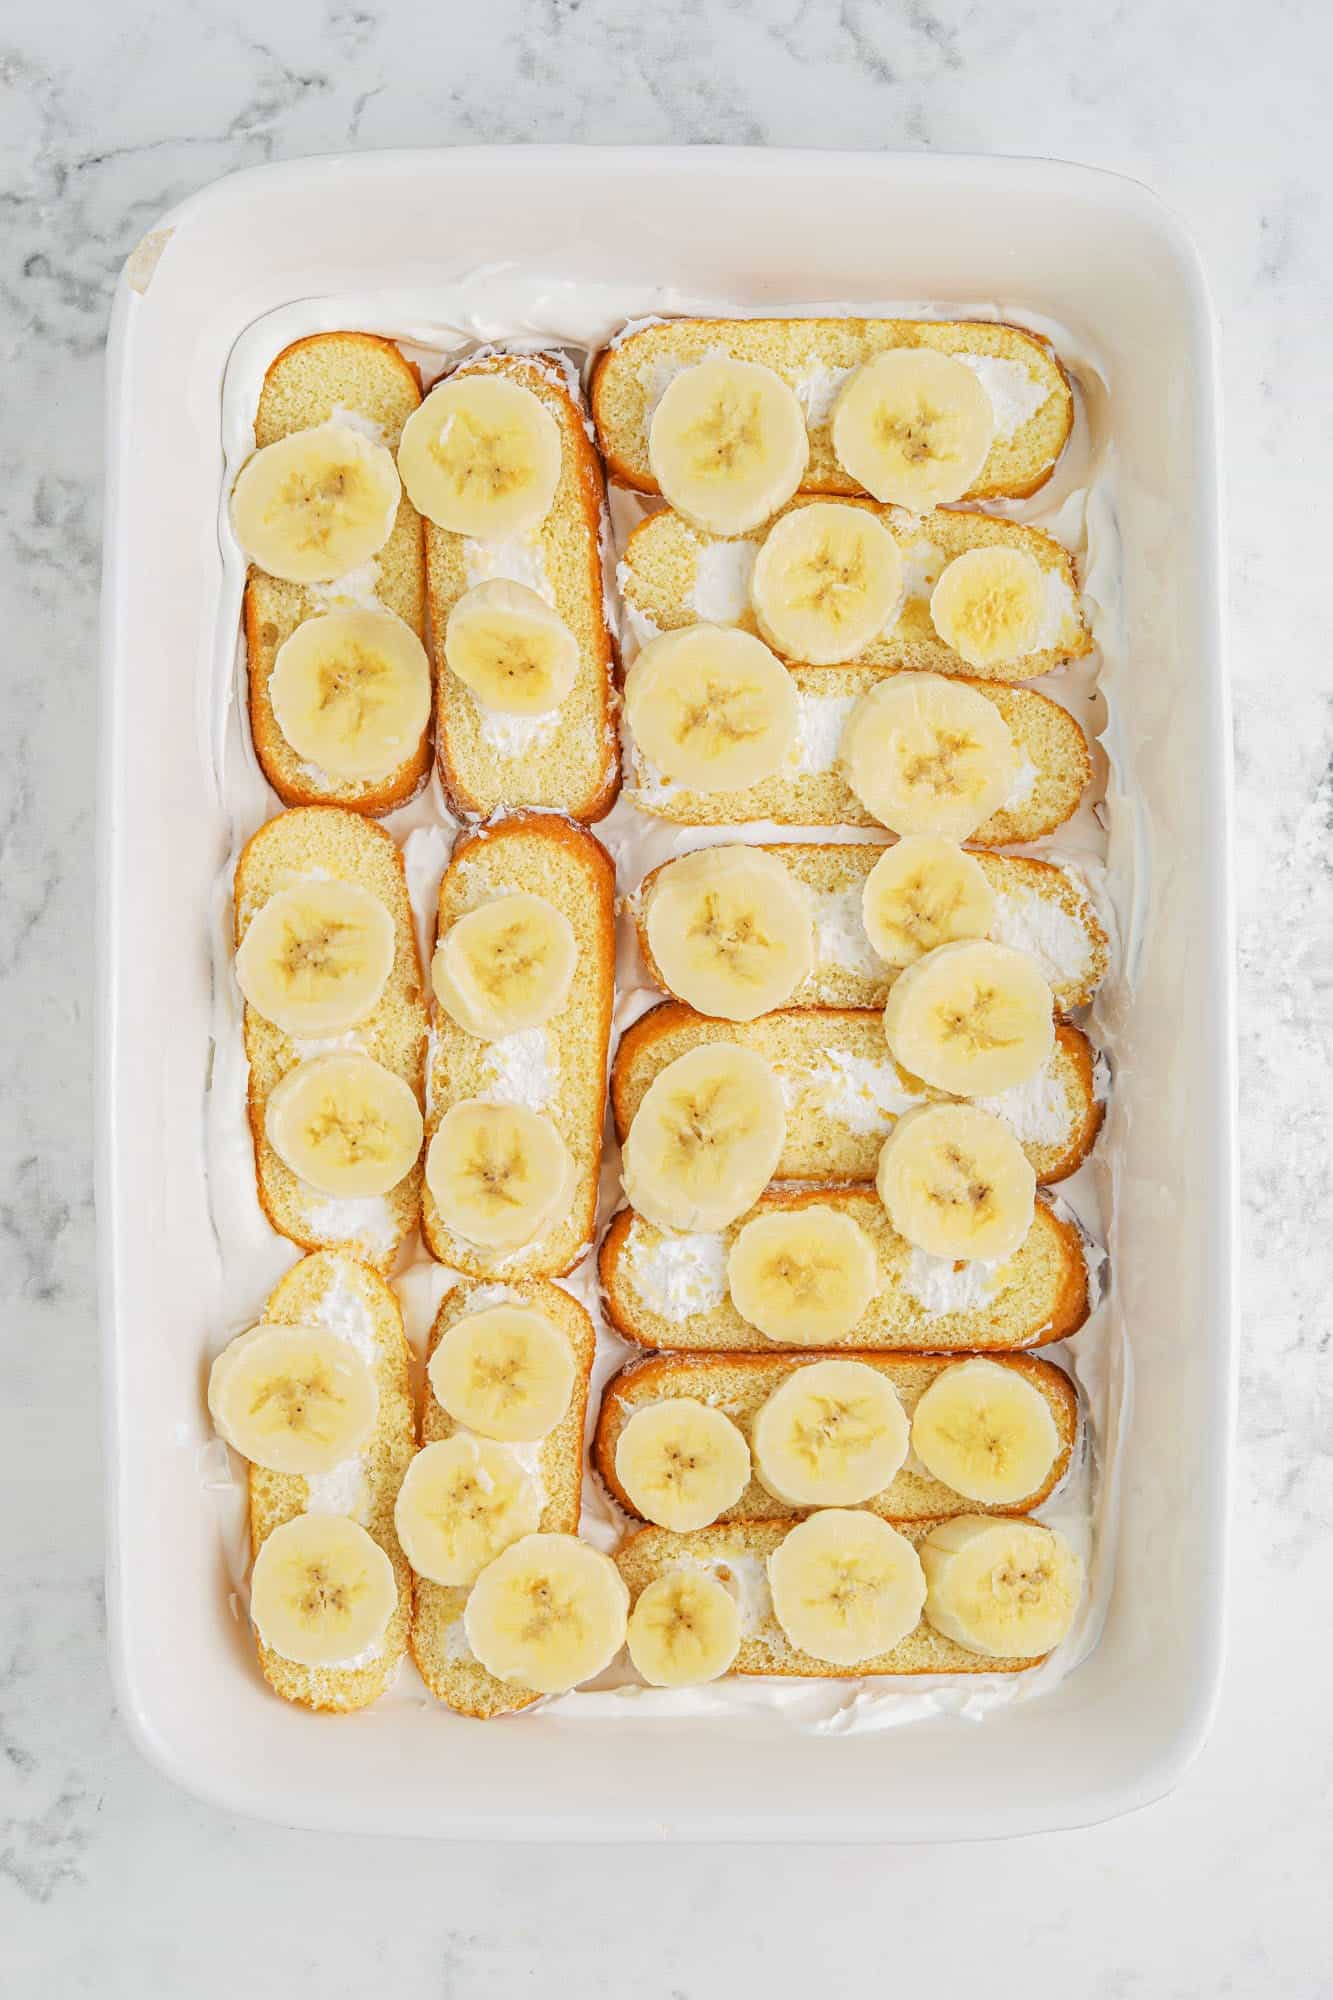 Twinkies laid out in a 9x13 baking dish with sliced bananas on top